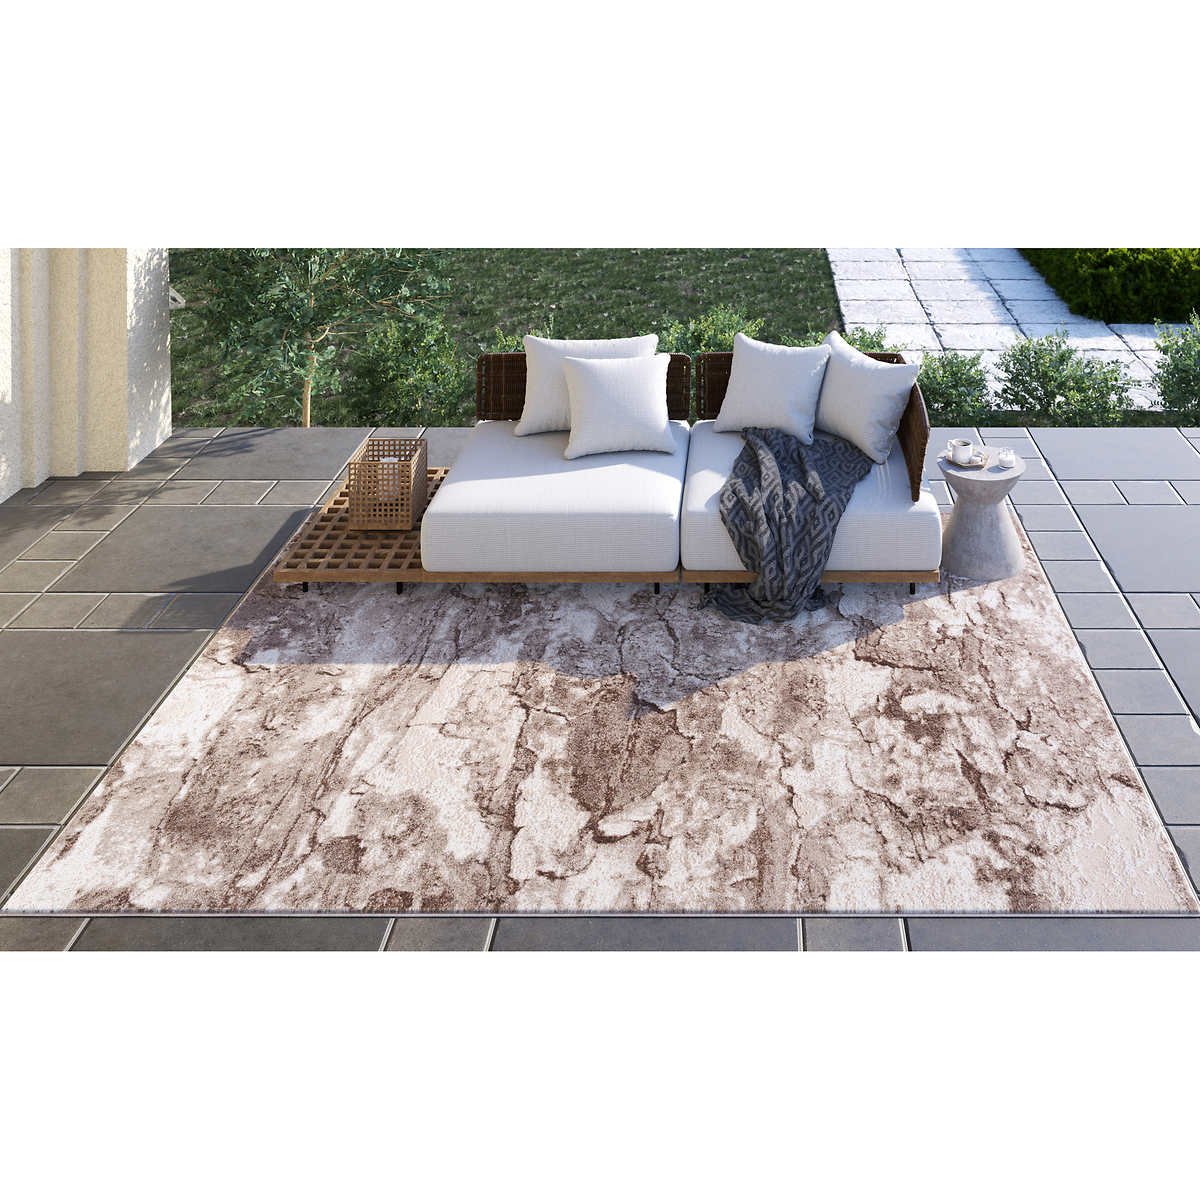 Carmel Indoor Outdoor Area Rug Or, Outdoor Carpet Runners For Porches And Decks